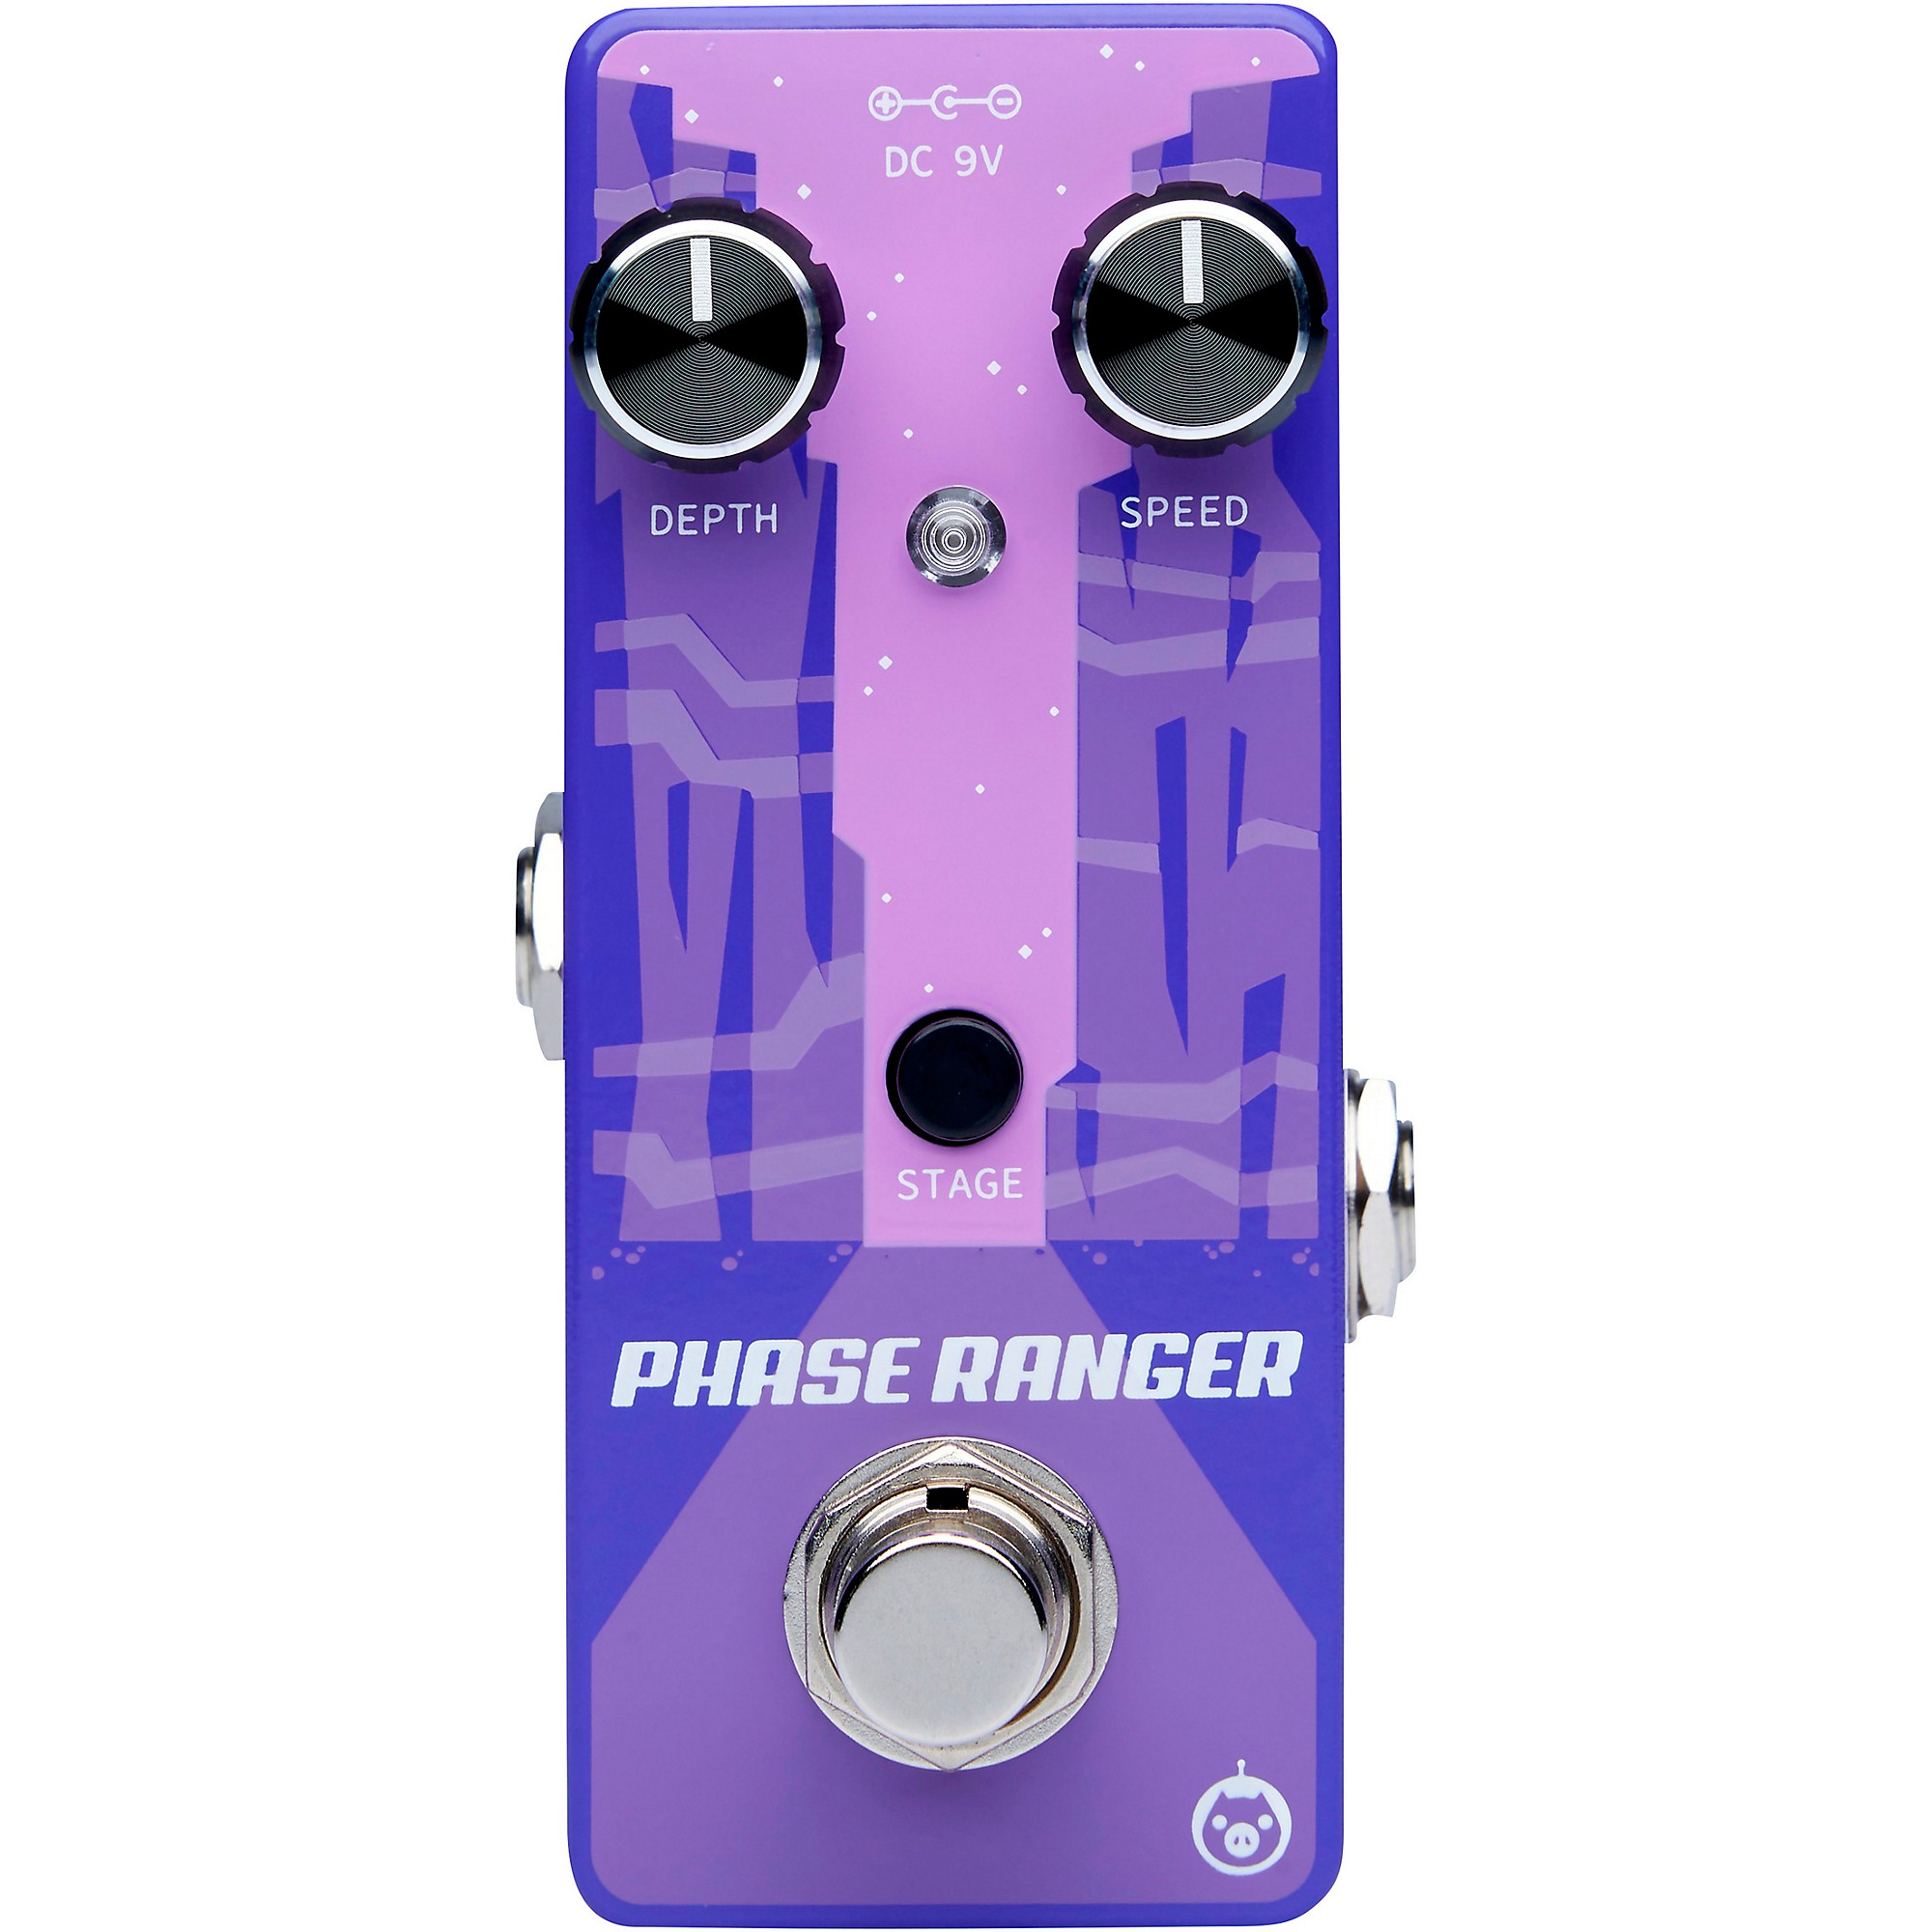 Pigtronix Phase Ranger is SDOTD. How does it compare to a Phase 95 ...